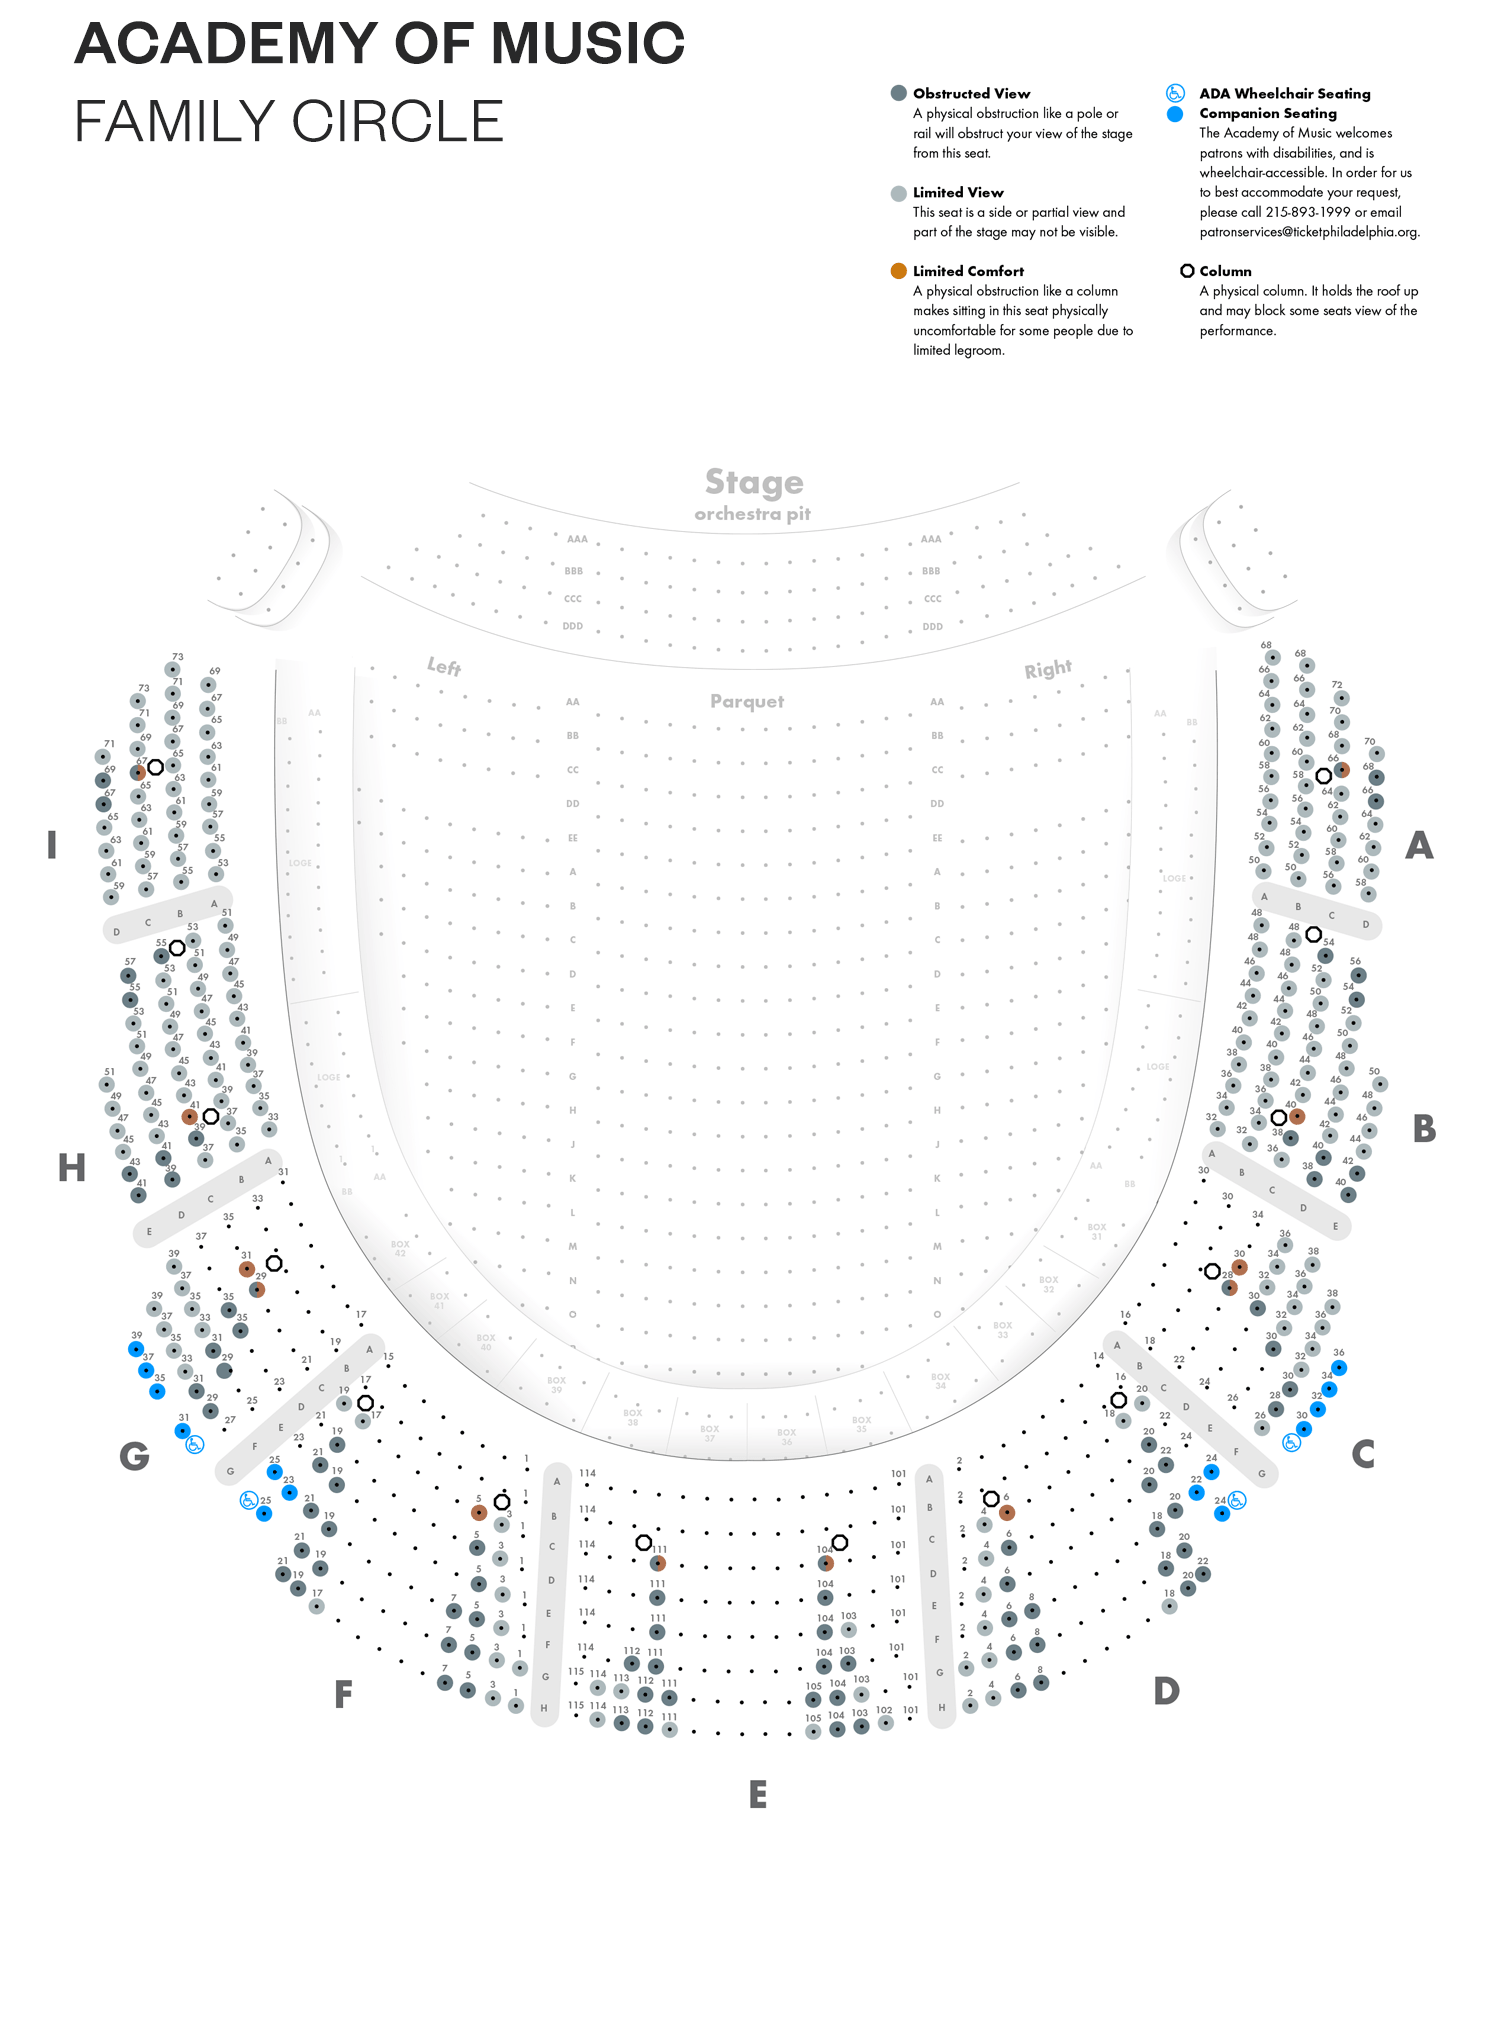 Academy of Music - Family Circle - Seating Chart